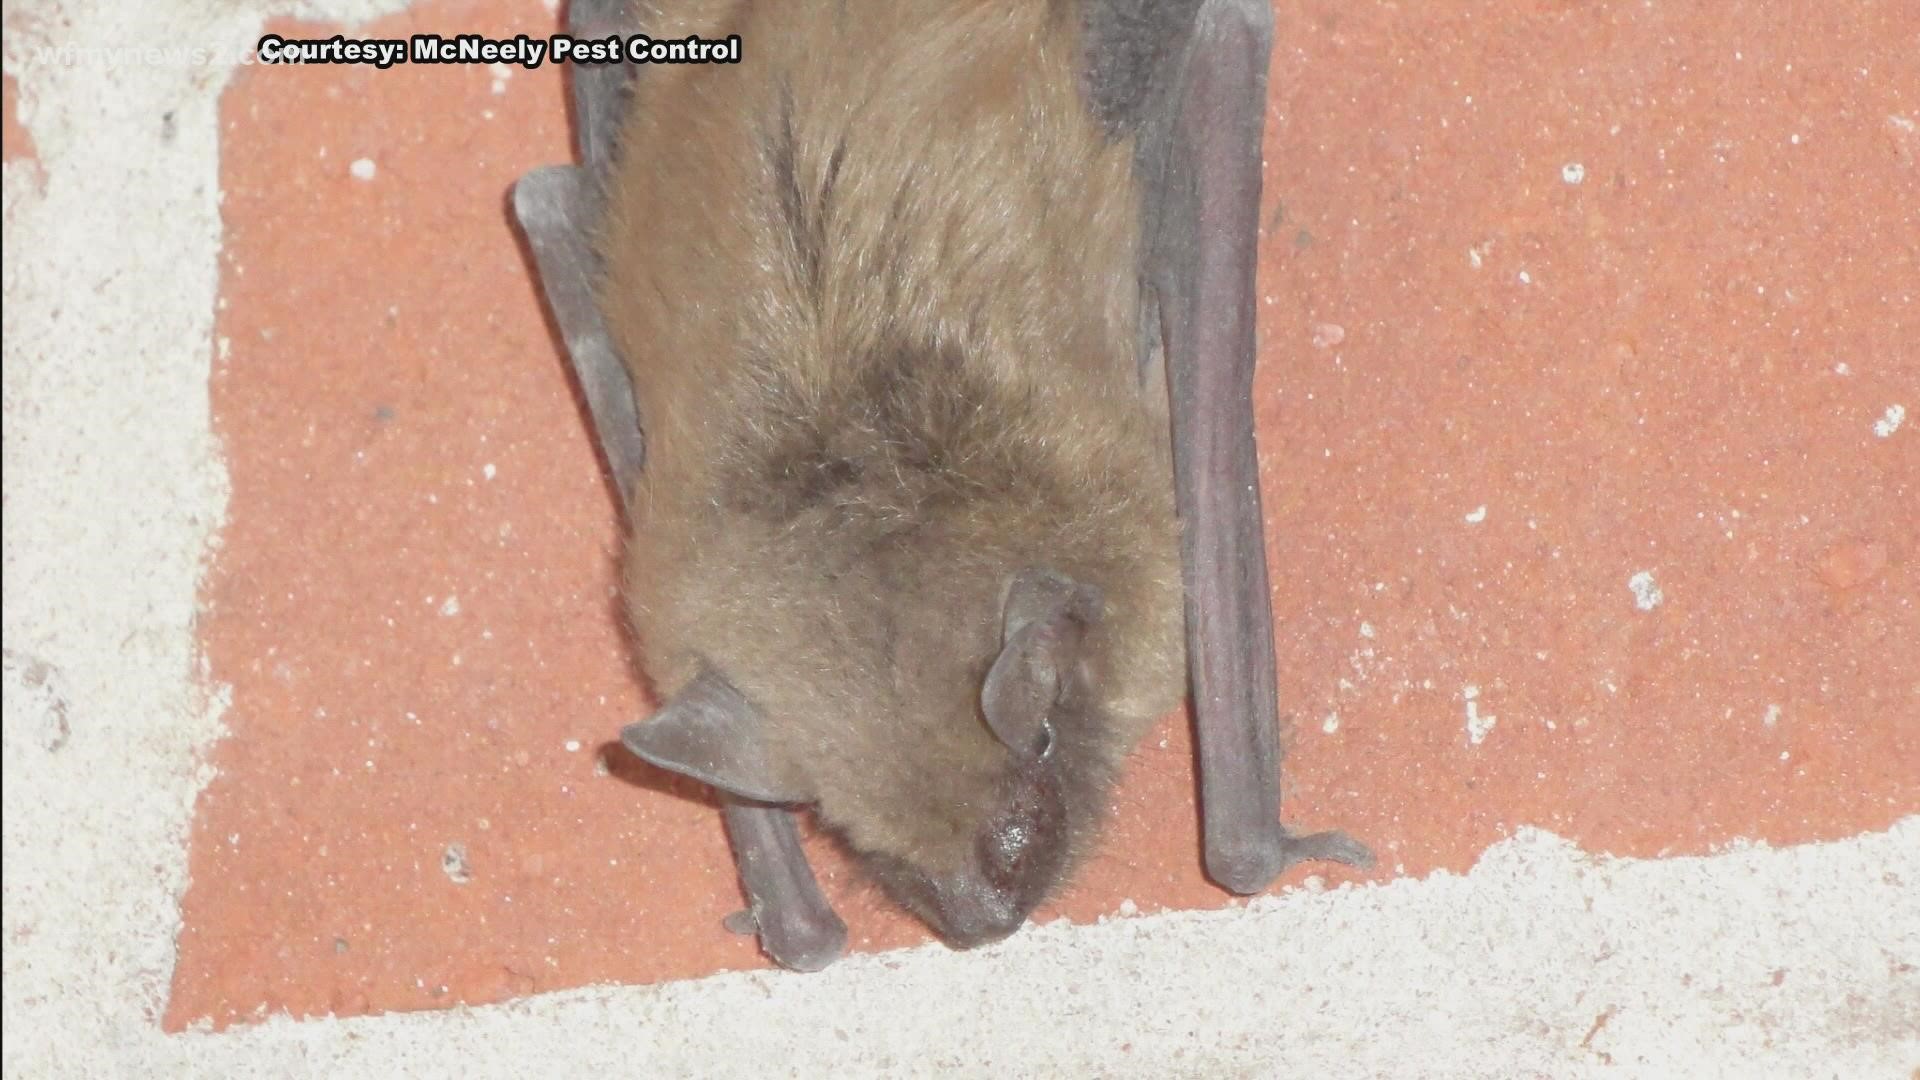 May 1 through July 31 is pup-rearing season for bats so they cannot be removed during that time.